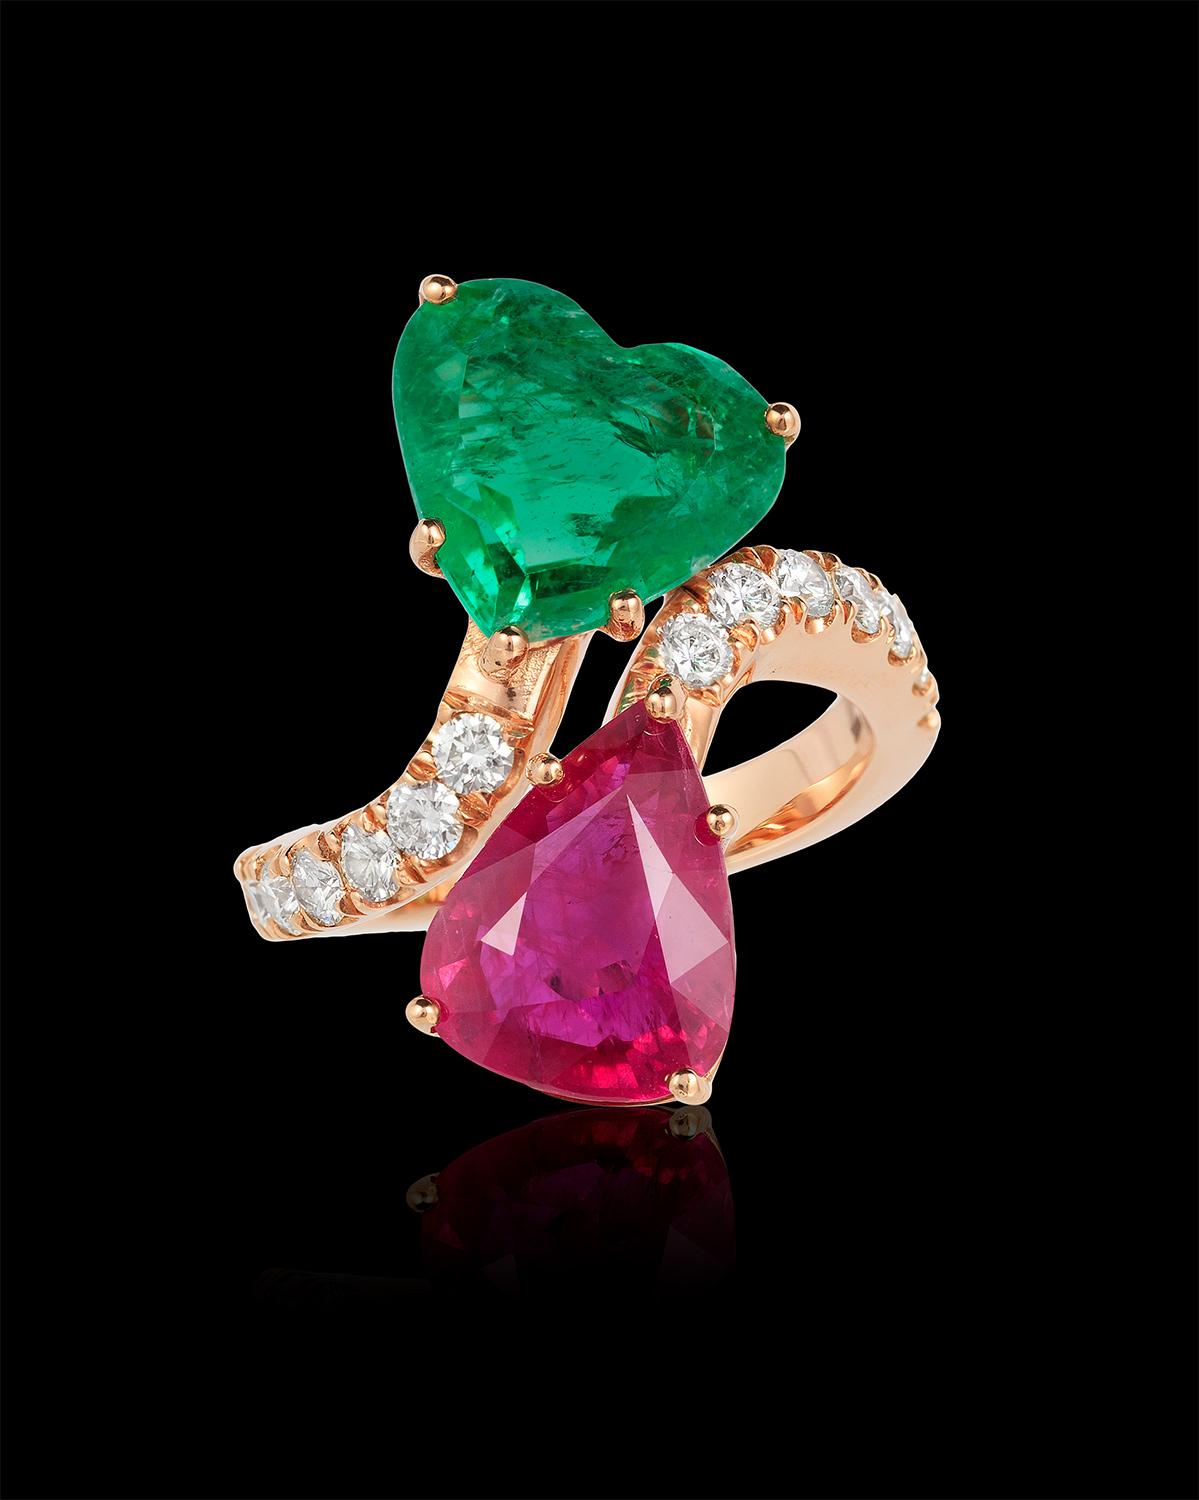 Andreoli Certified 3.84 Carat Colombian Hear tShape Emerald 4.76 Carat Ruby Rin

This ring features:

- 0.83 carat round brilliant cut Diamonds G-H Color VS-SI Clarity
- 4.76 carat CDC Swiss Lab Certified Pear shape ruby Mozambique origin
- 3.86